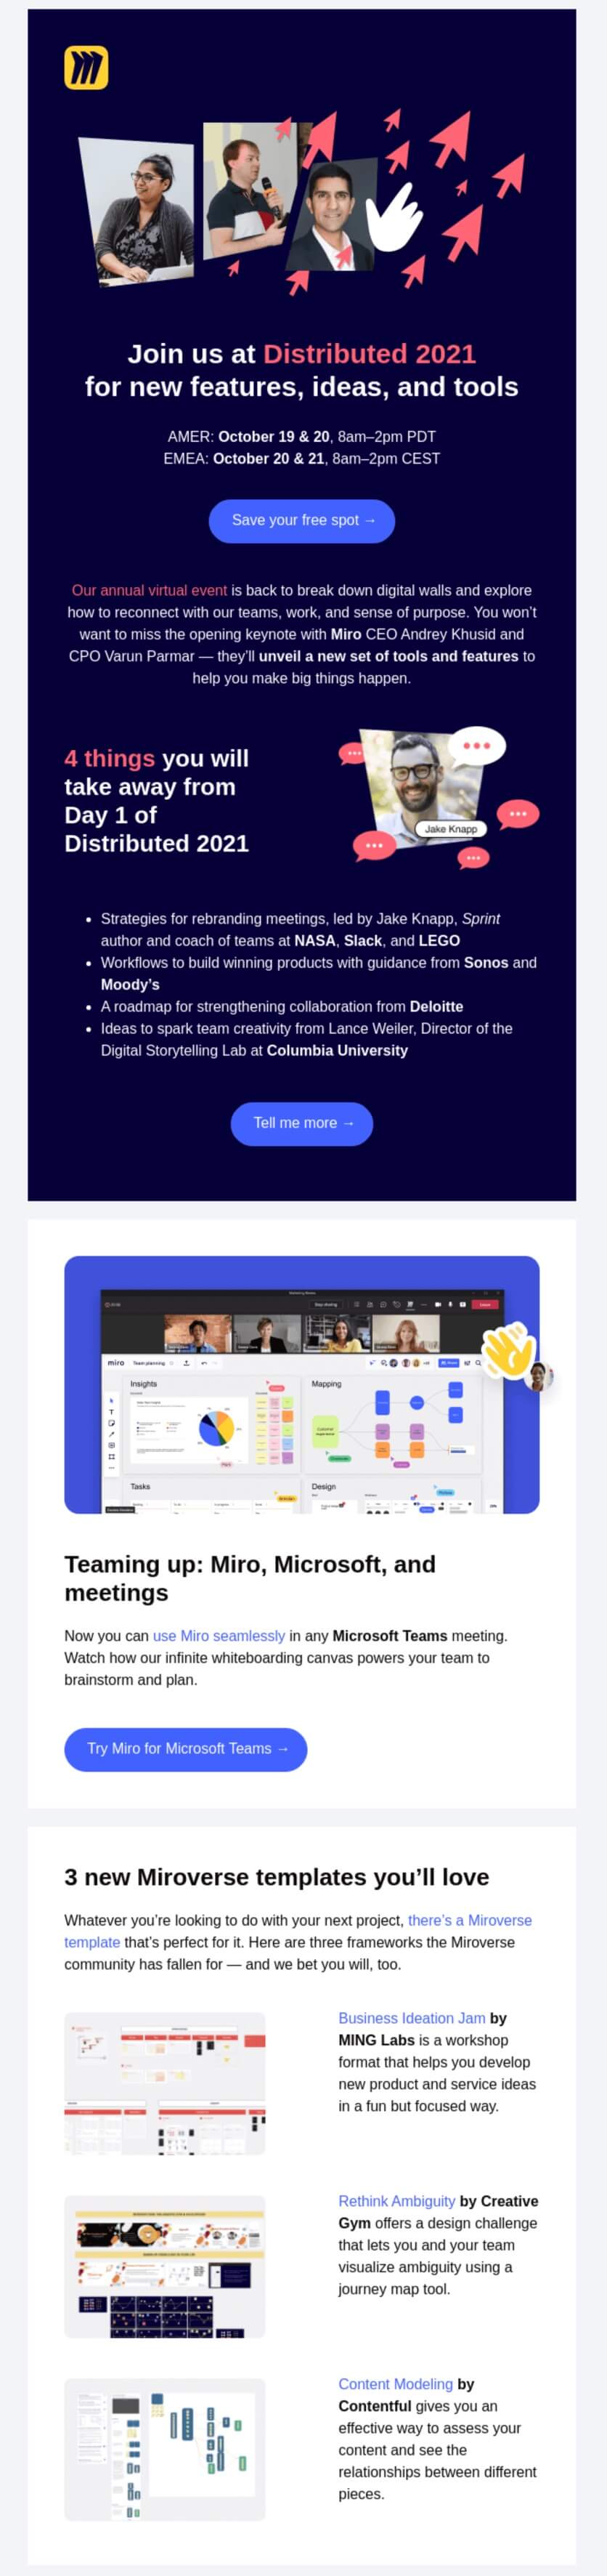 An event newsletter email from Miro